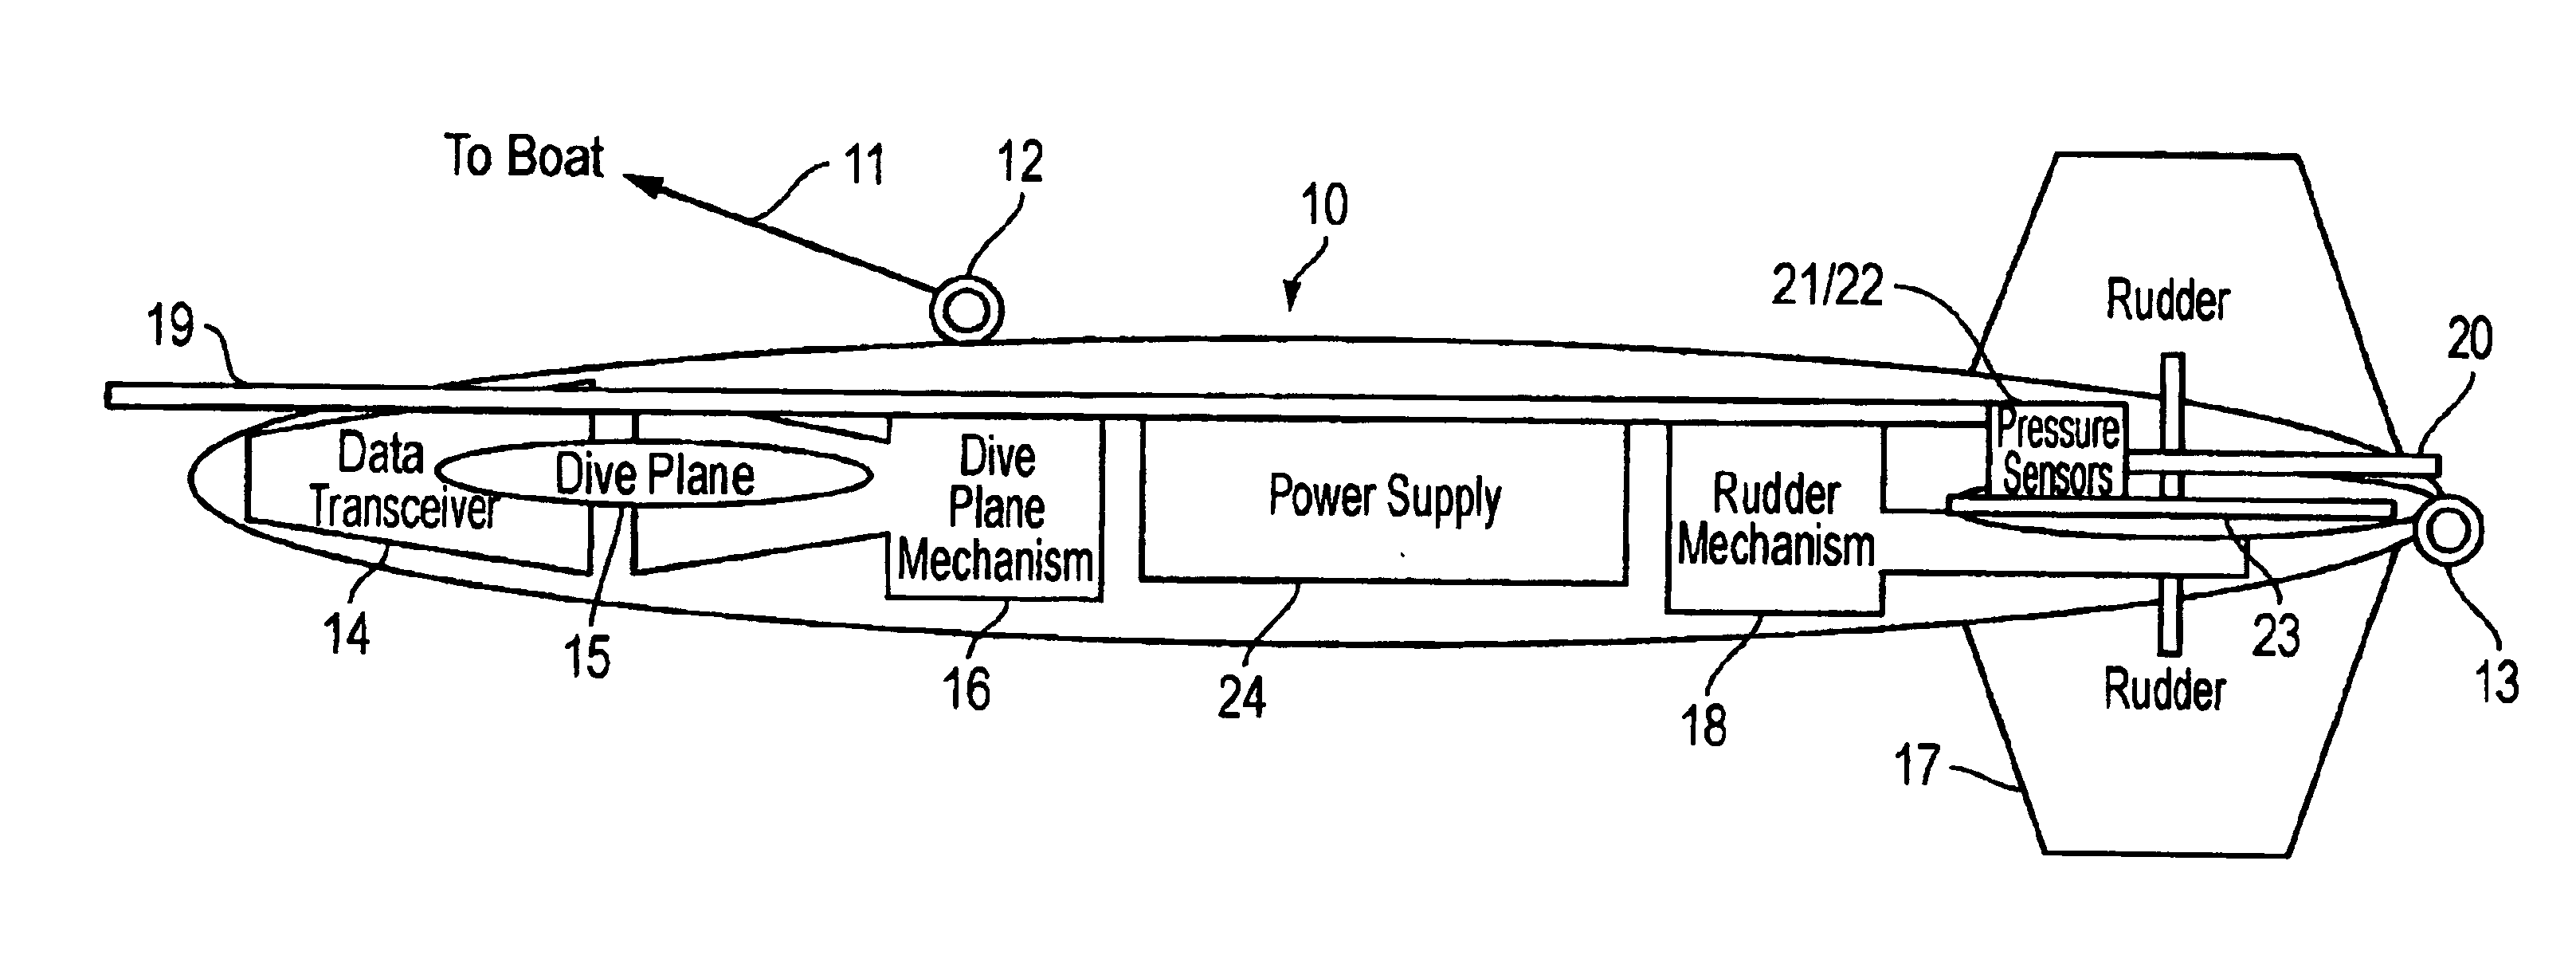 Electronic fishing device steerable in azimuth and depth by remote control or preprogrammed instructions